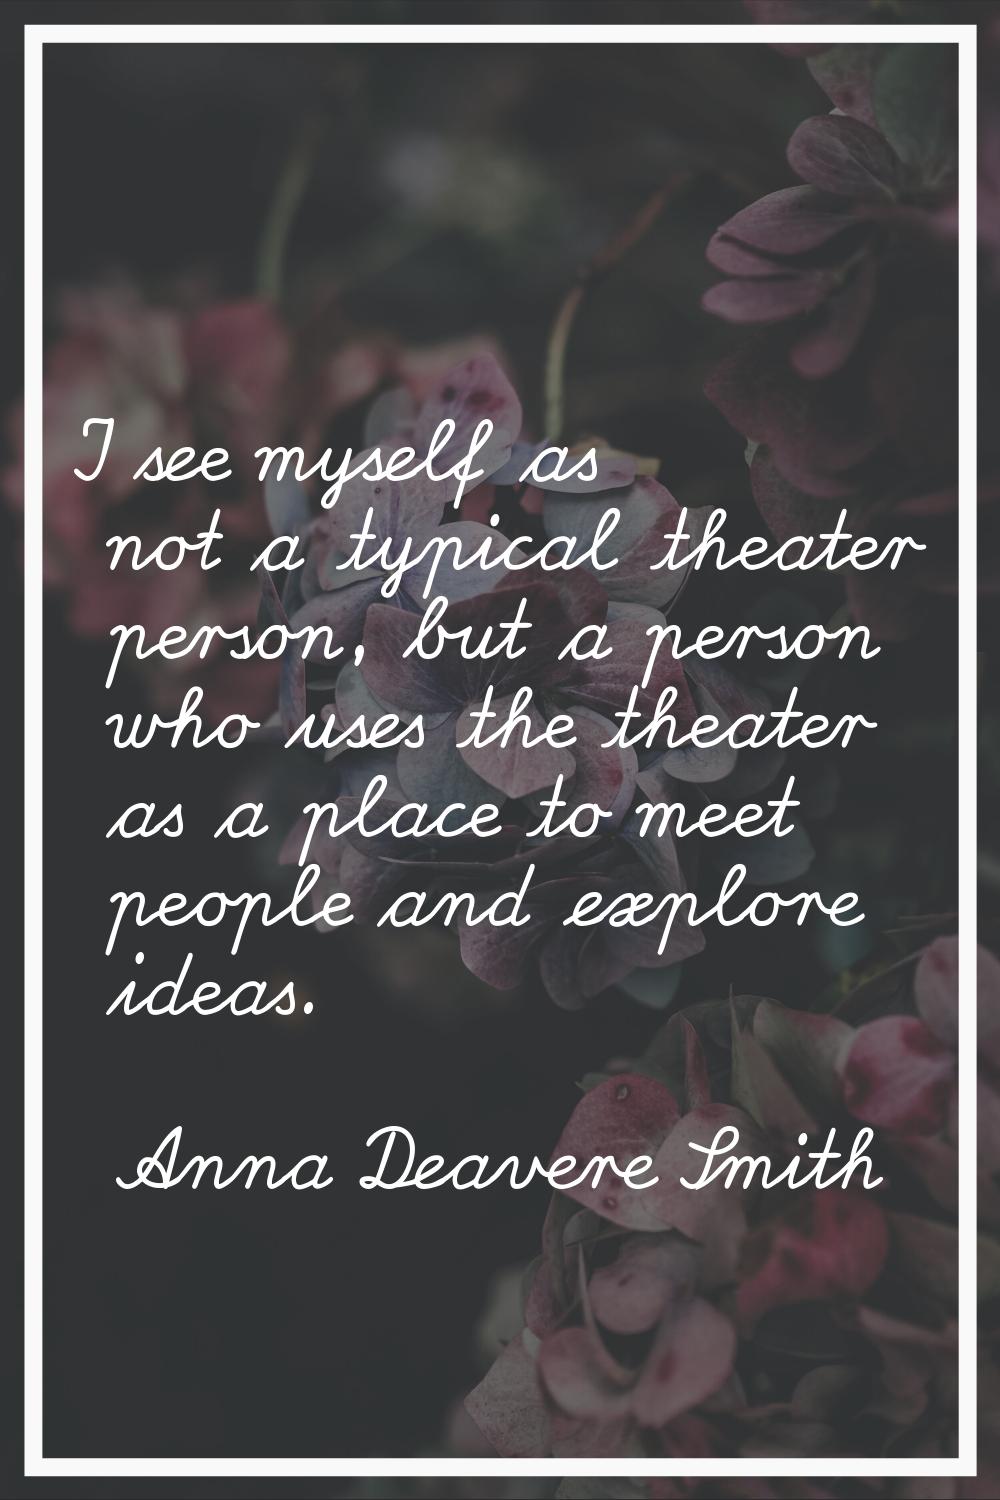 I see myself as not a typical theater person, but a person who uses the theater as a place to meet 